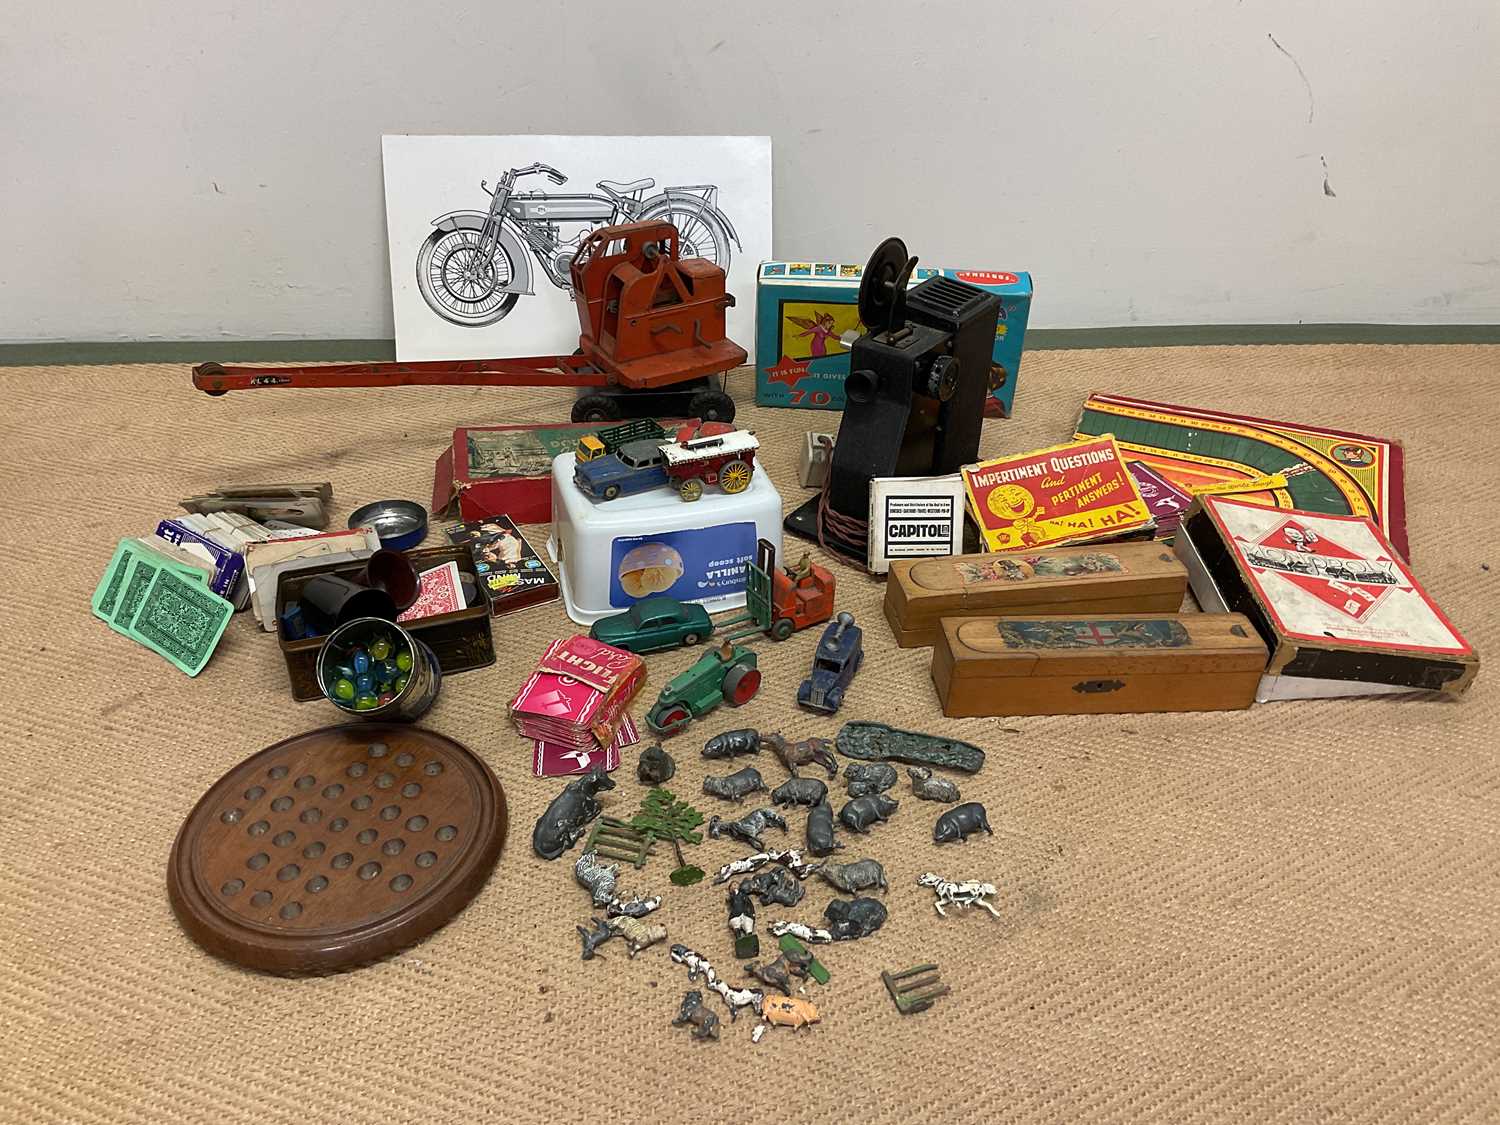 A quantity of vintage toys including diecast vehicles, lead animals, board games and other items